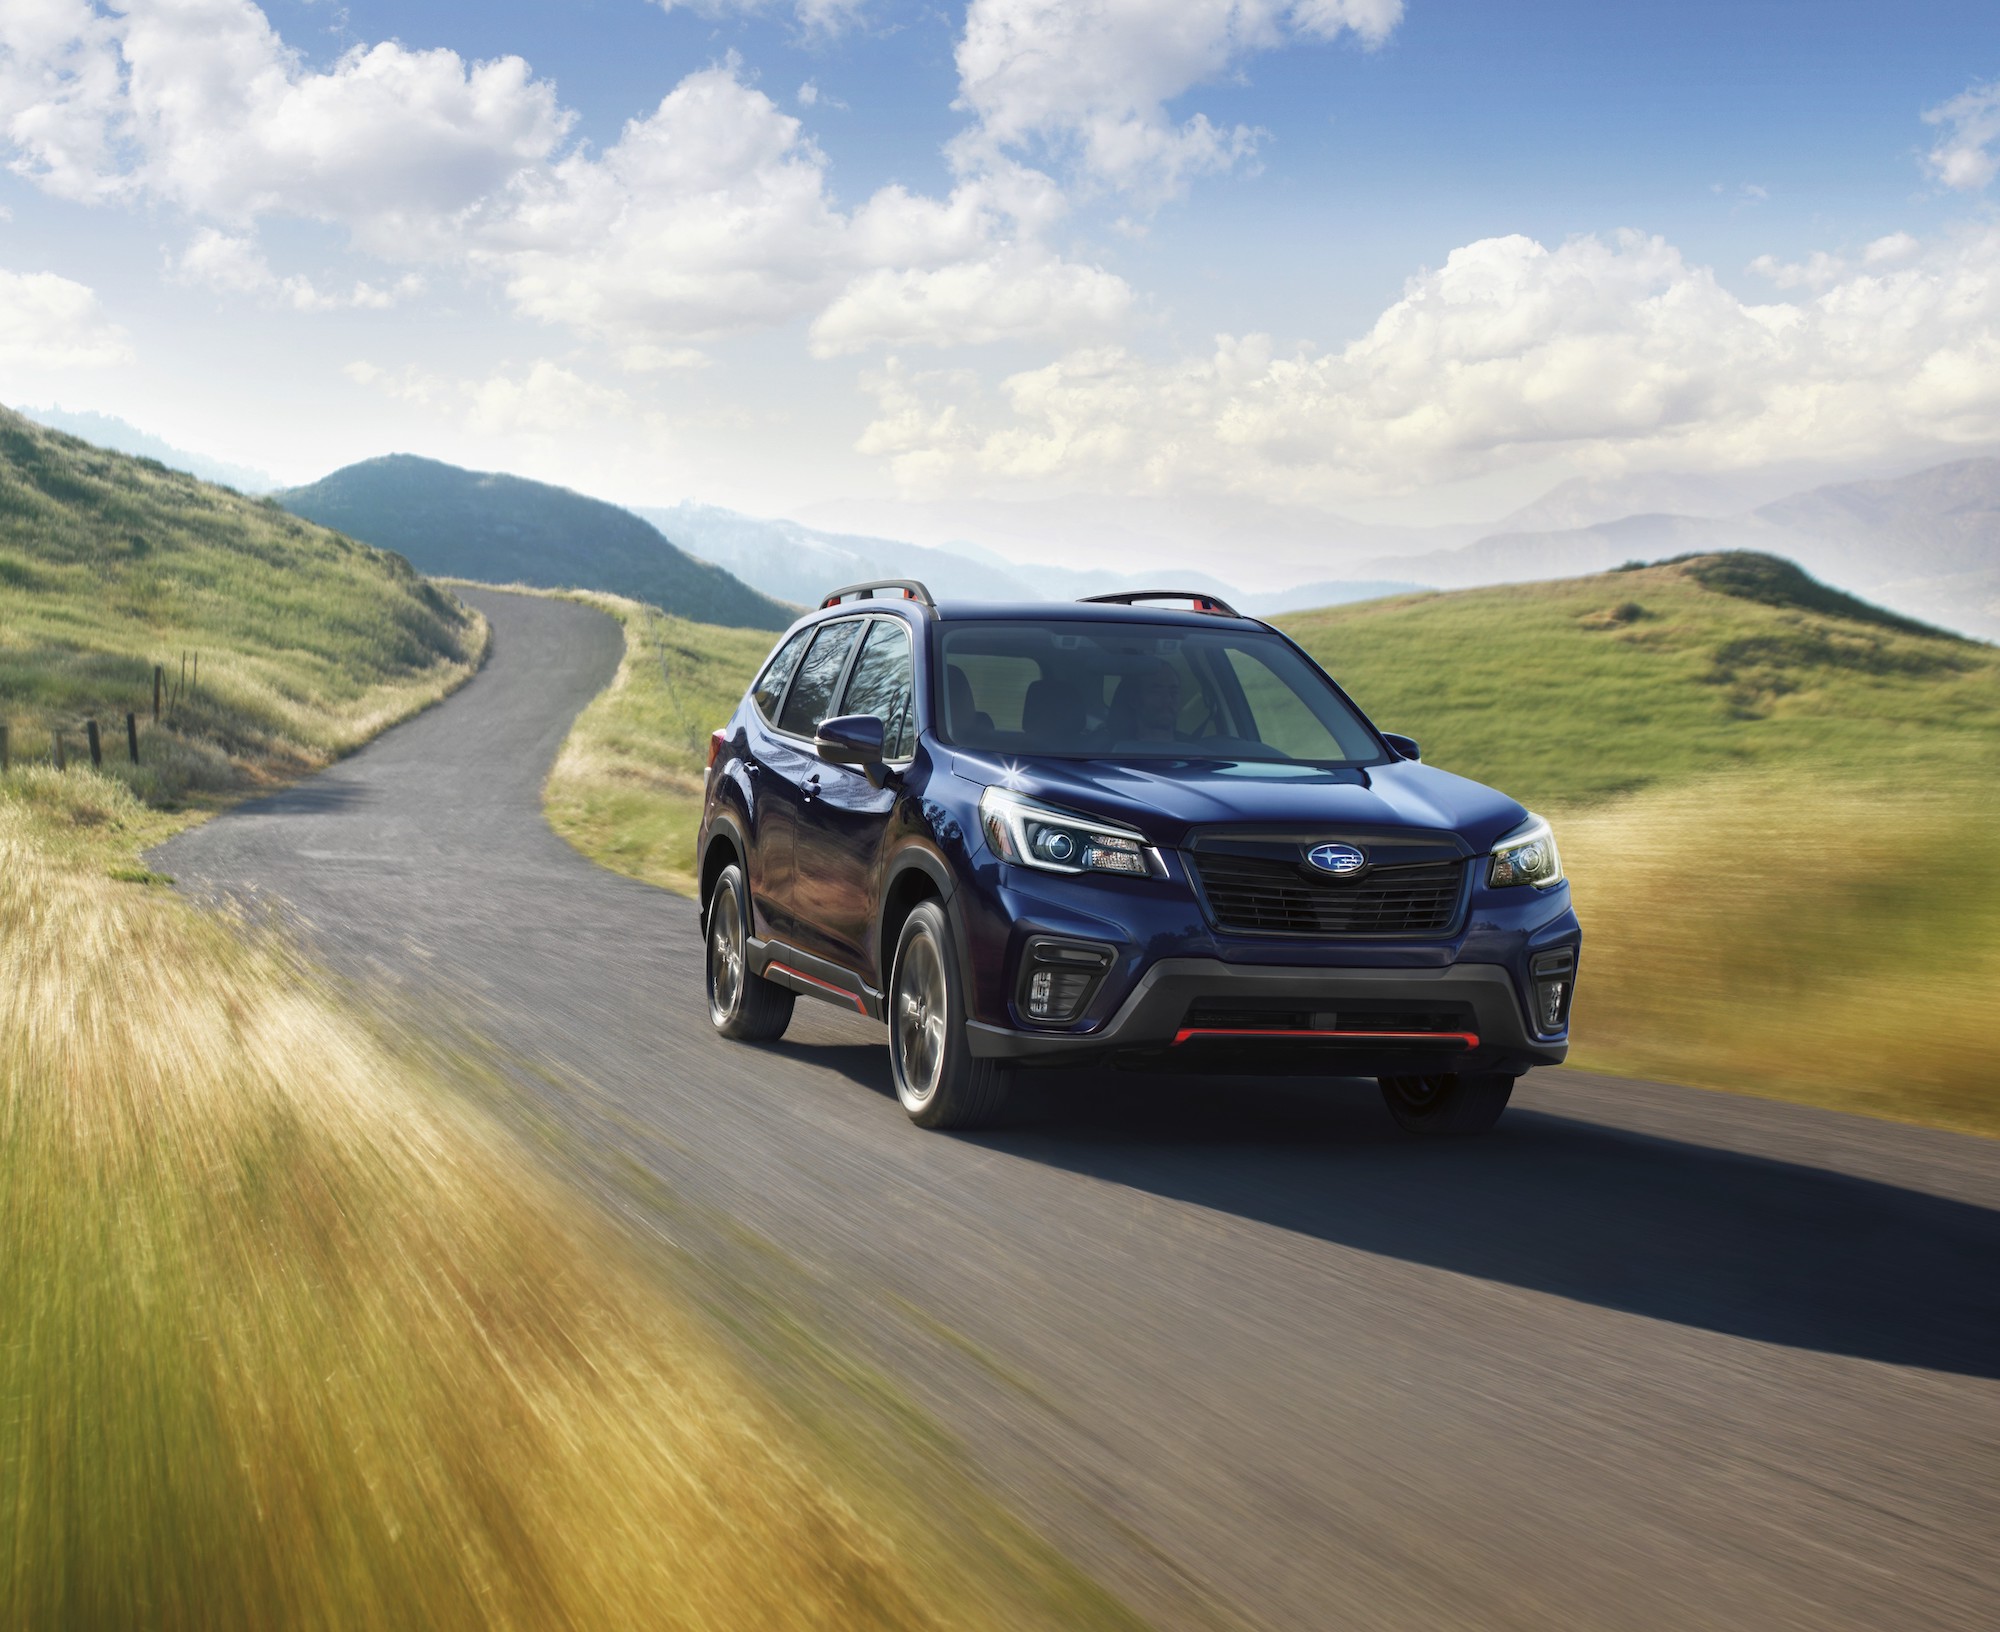 A dark-colored 2021 Subaru Forester travels on a paved road through grassy hills